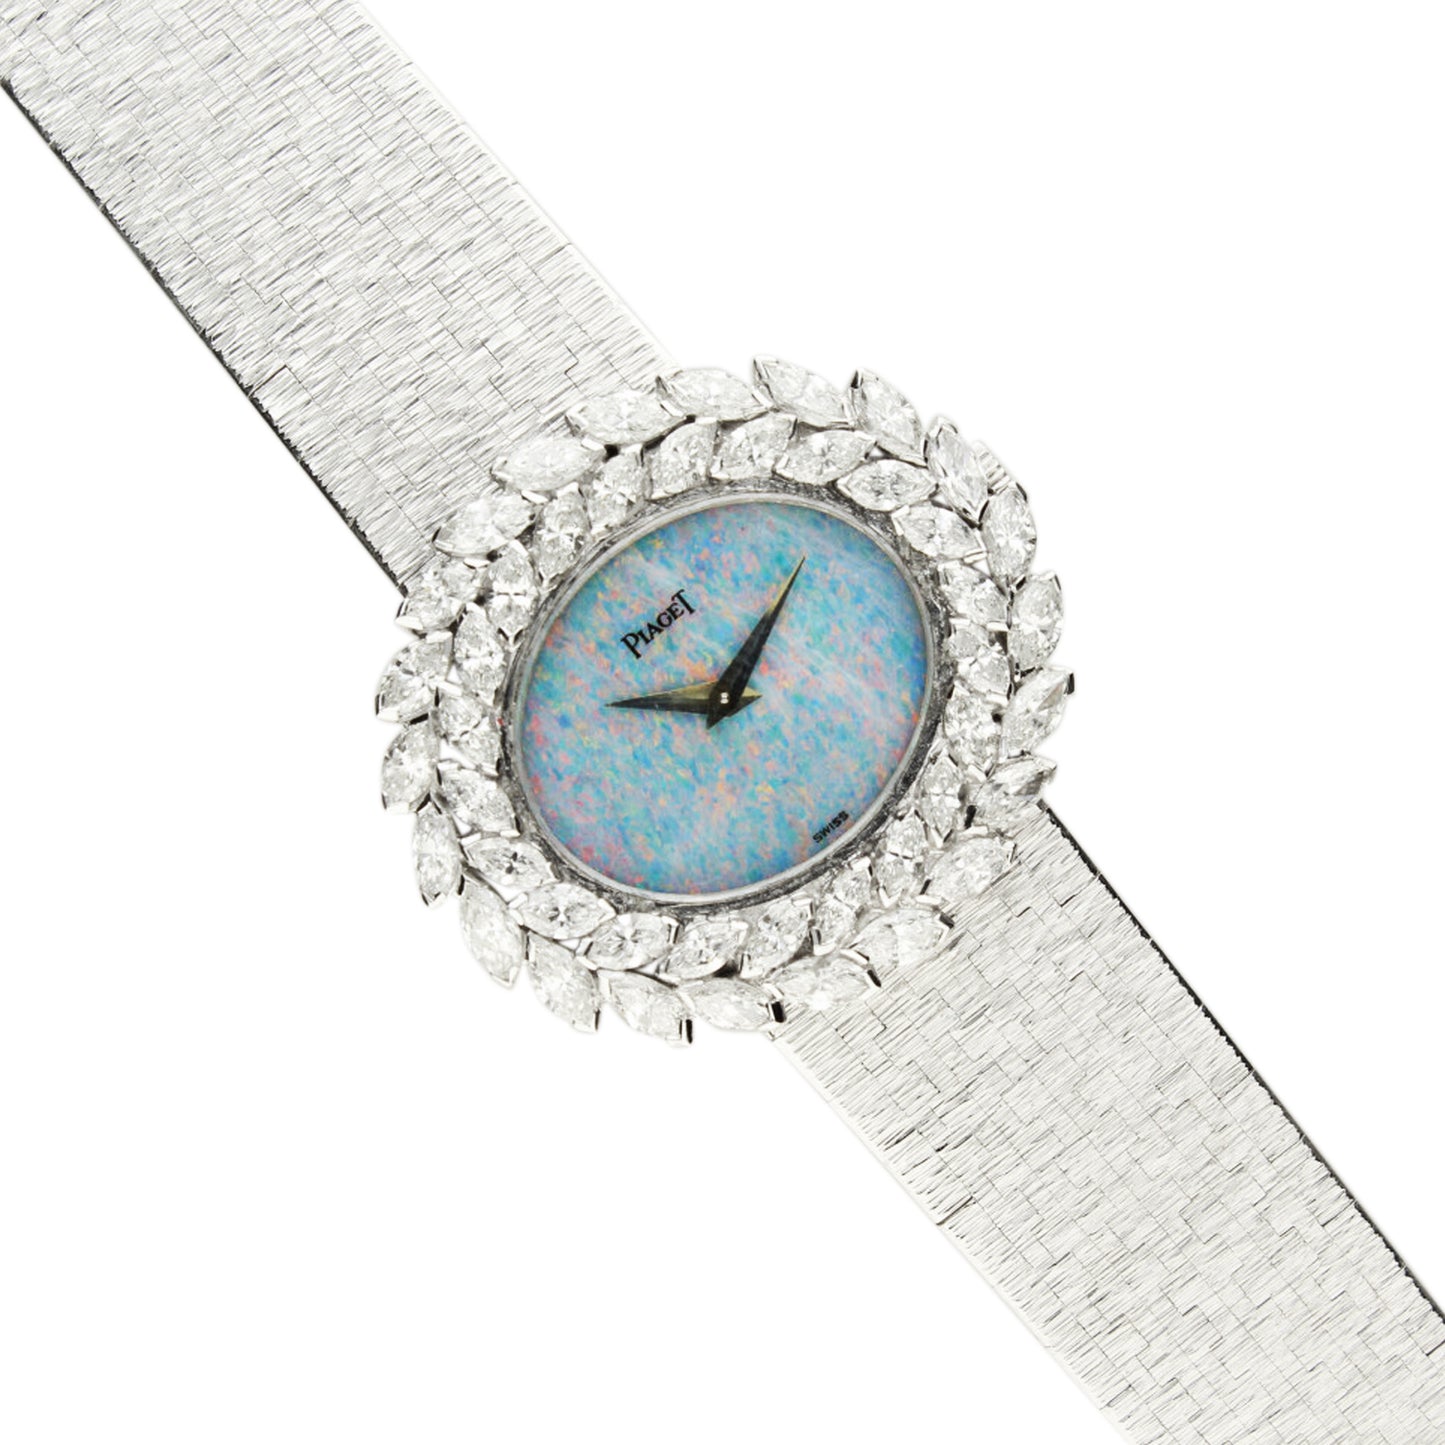 18ct white gold and diamond set Piaget, reference 9385 bracelet watch with opal dial. Made 1972